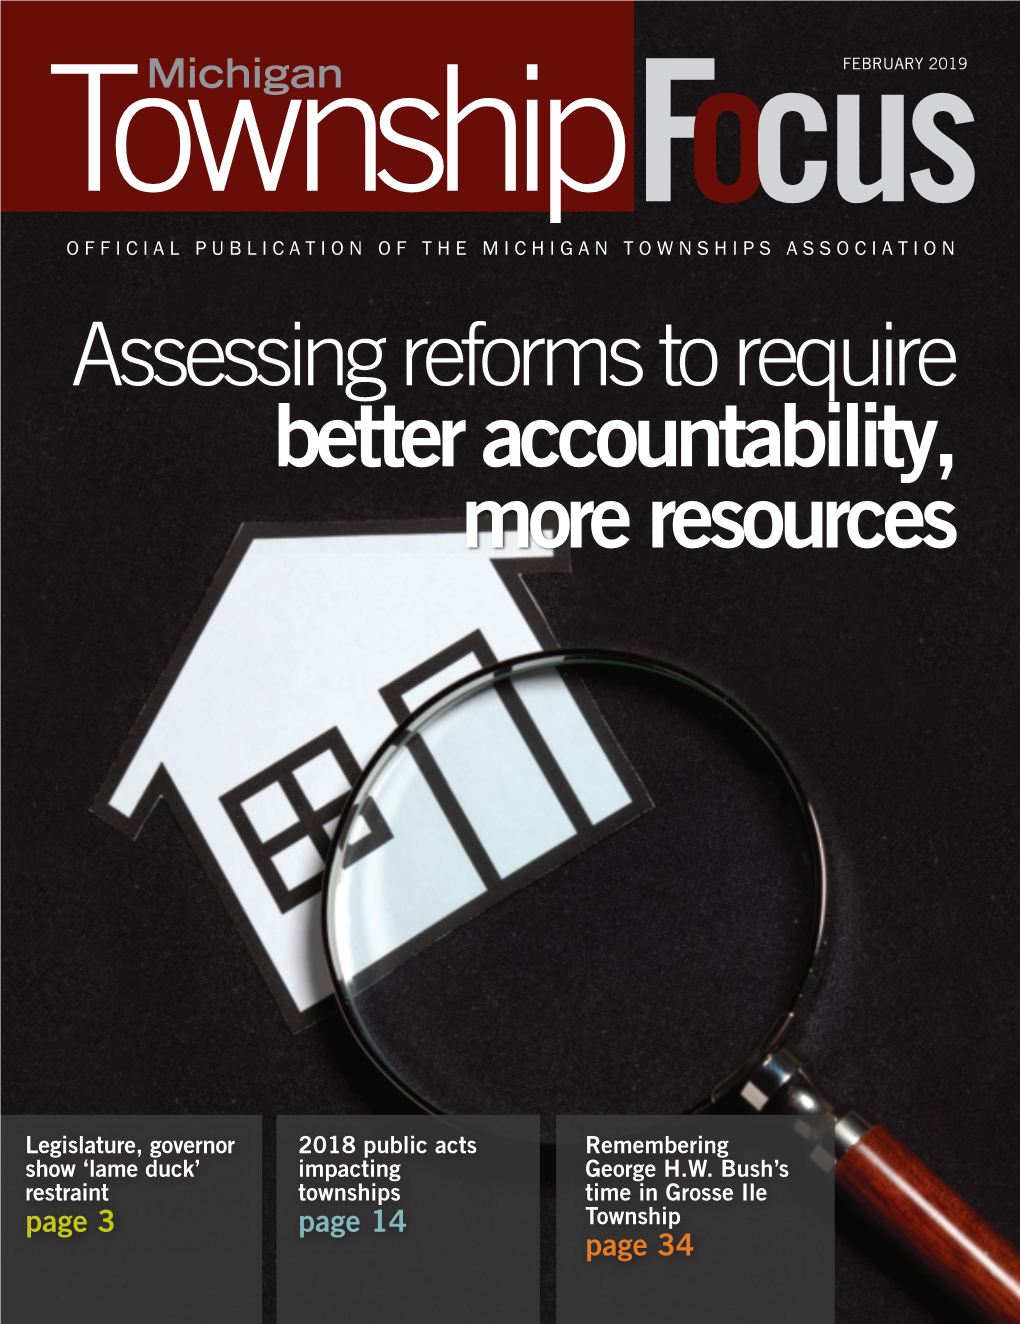 Read the February 2019 Township Focus